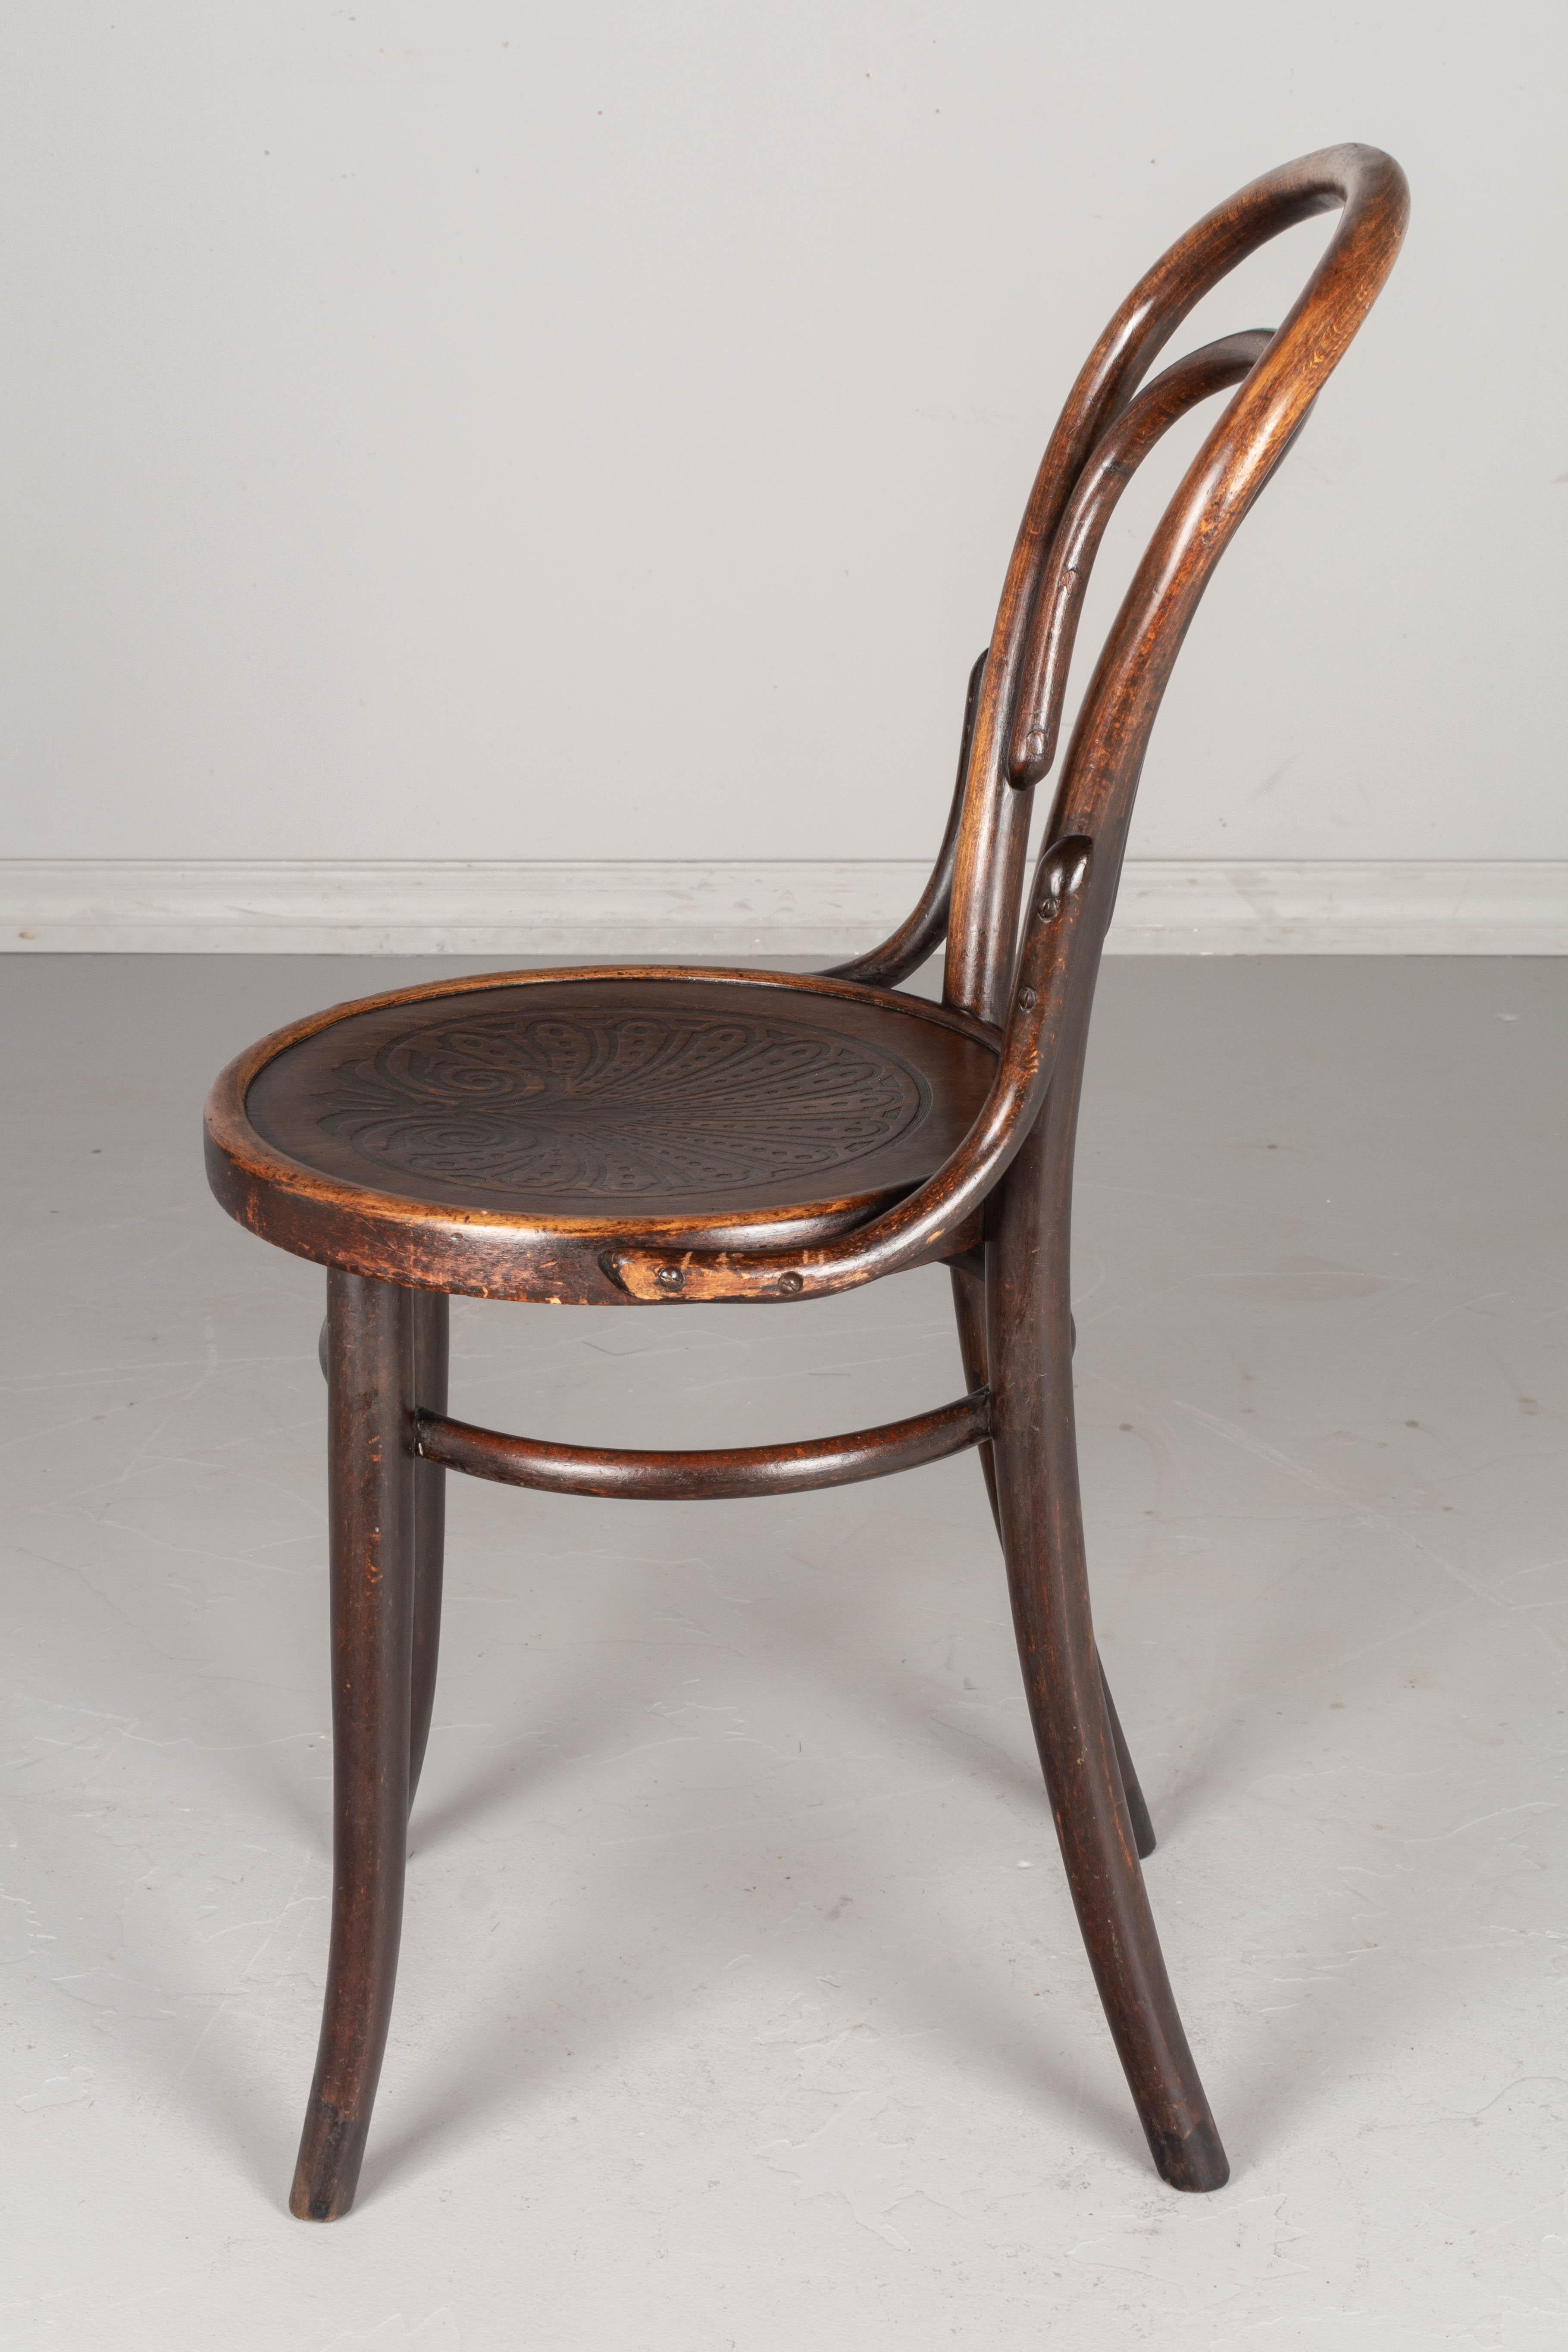 Art Nouveau Thonet Style Bentwood Bistro Chairs, Set of 4